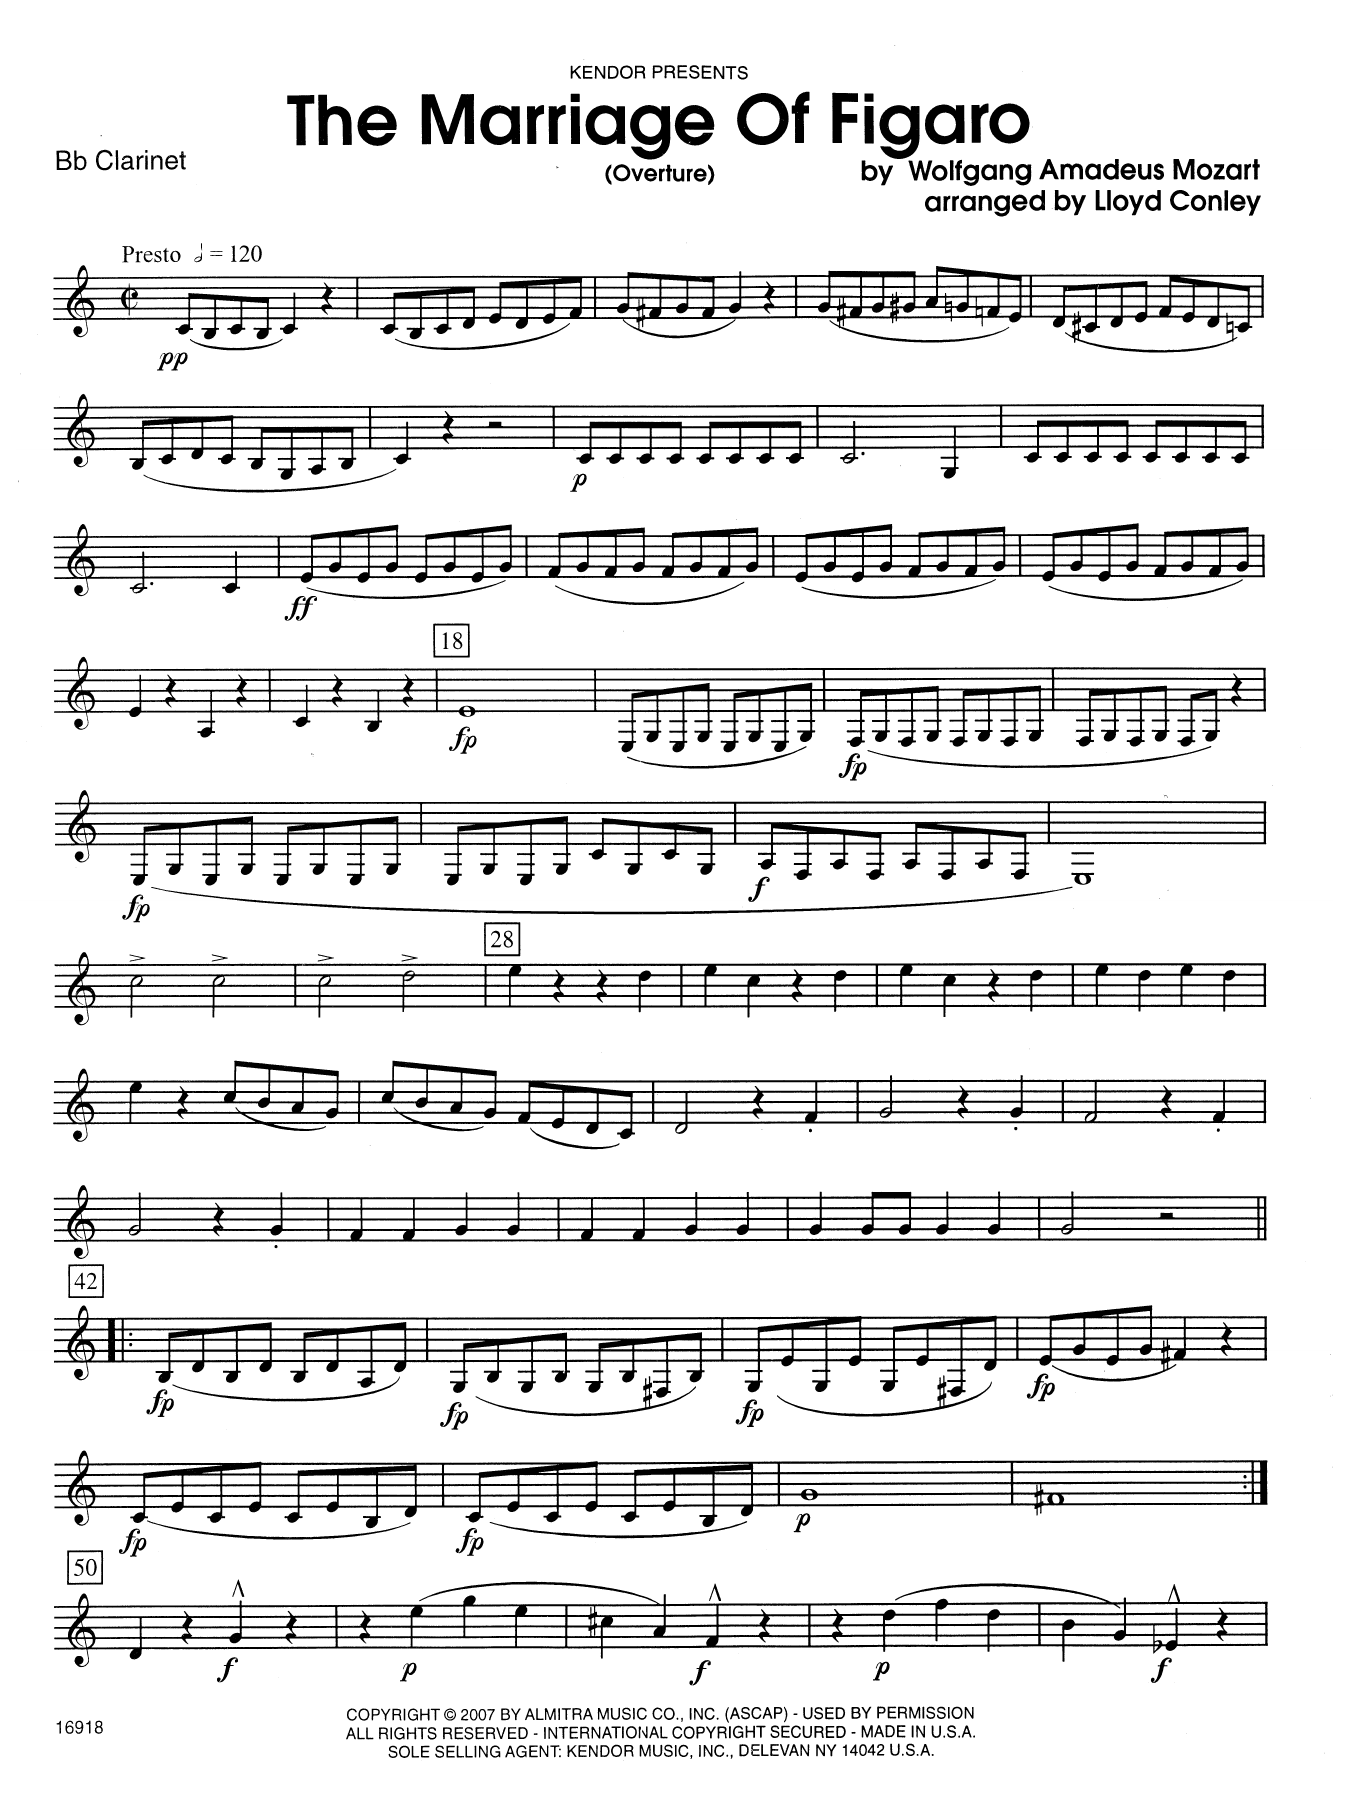 Lloyd Conley The Marriage Of Figaro (Overture) - Bb Clarinet sheet music notes and chords. Download Printable PDF.